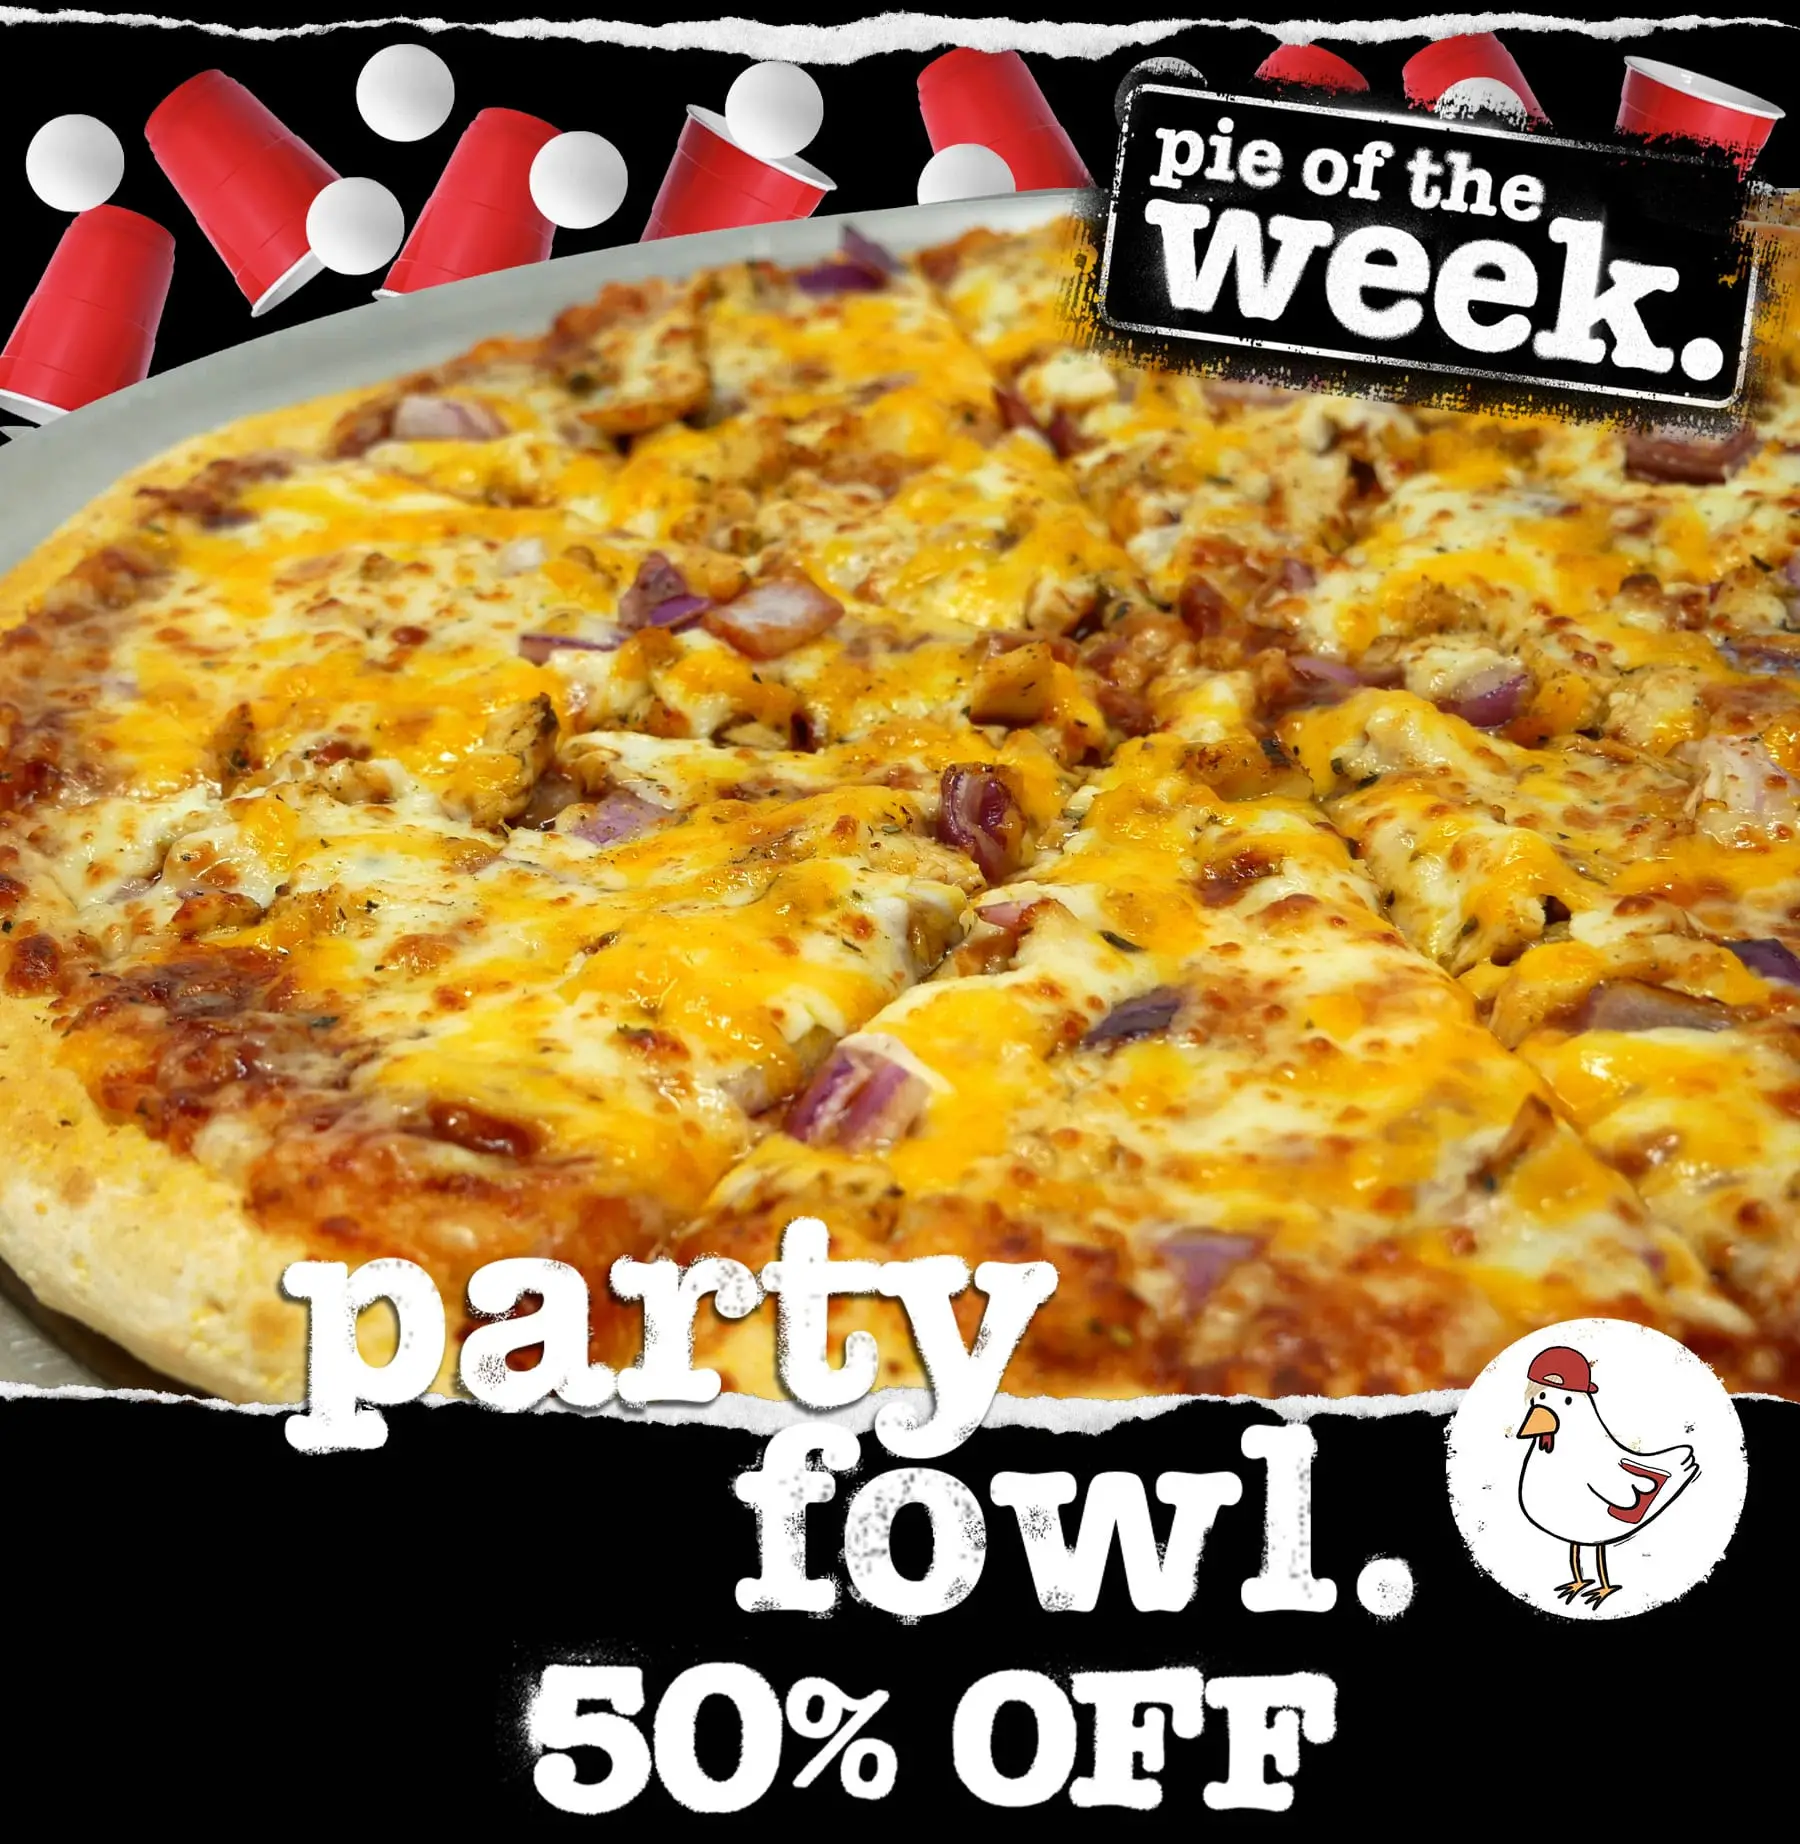 HotBox Pizza National Pizza Day Enjoy 50% Discount on Pie of the Week